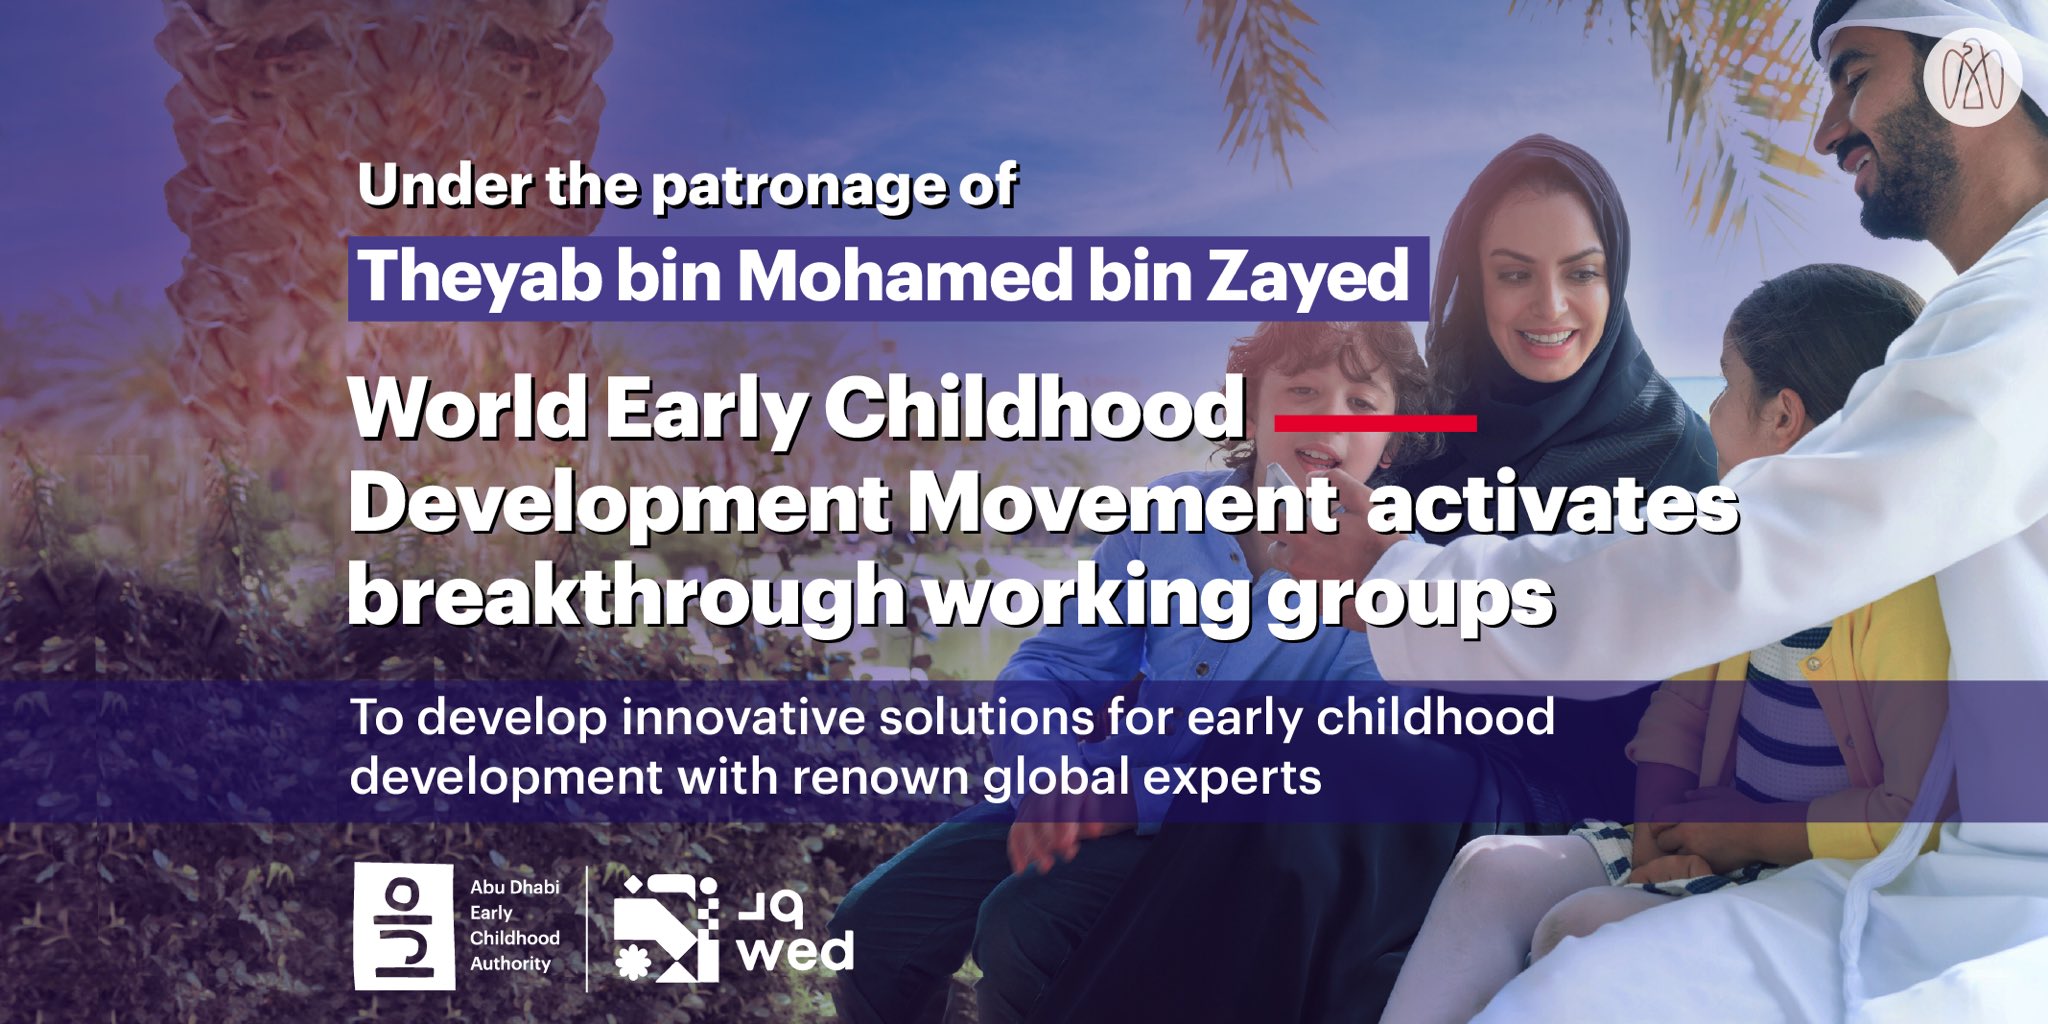 Abu Dhabi Early Childhood Authority’s WED Movement Engages Global Experts To Drive Innovation, Excellence